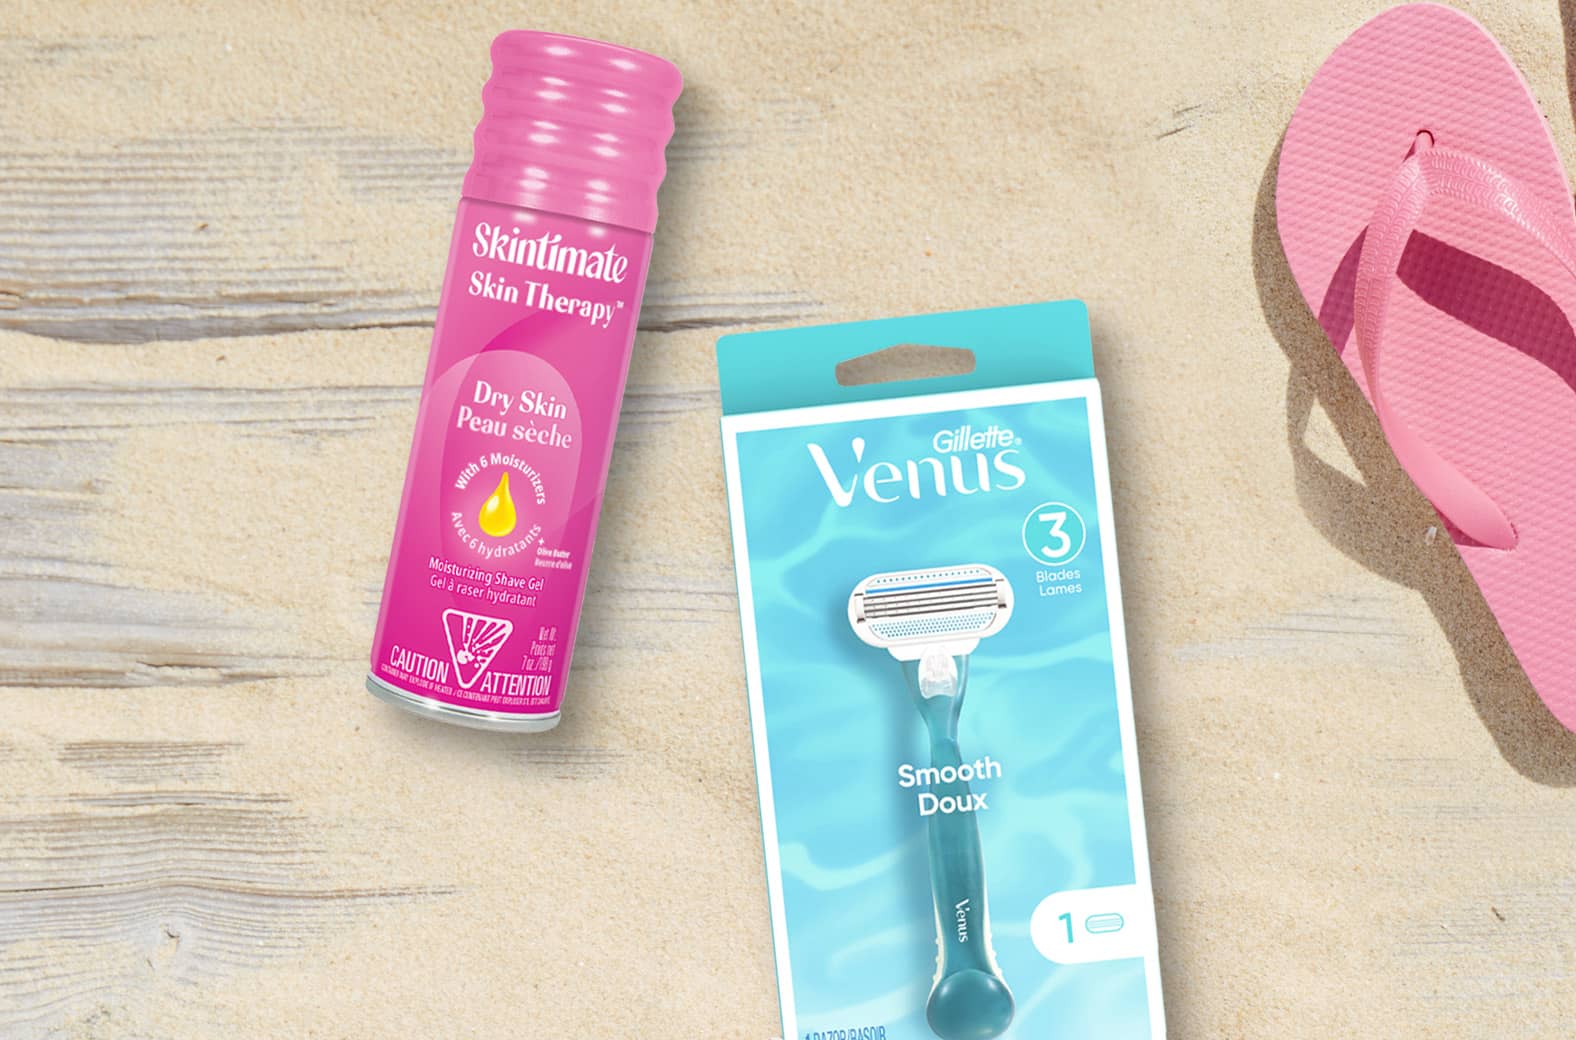 Skintimate and Venus shaving products